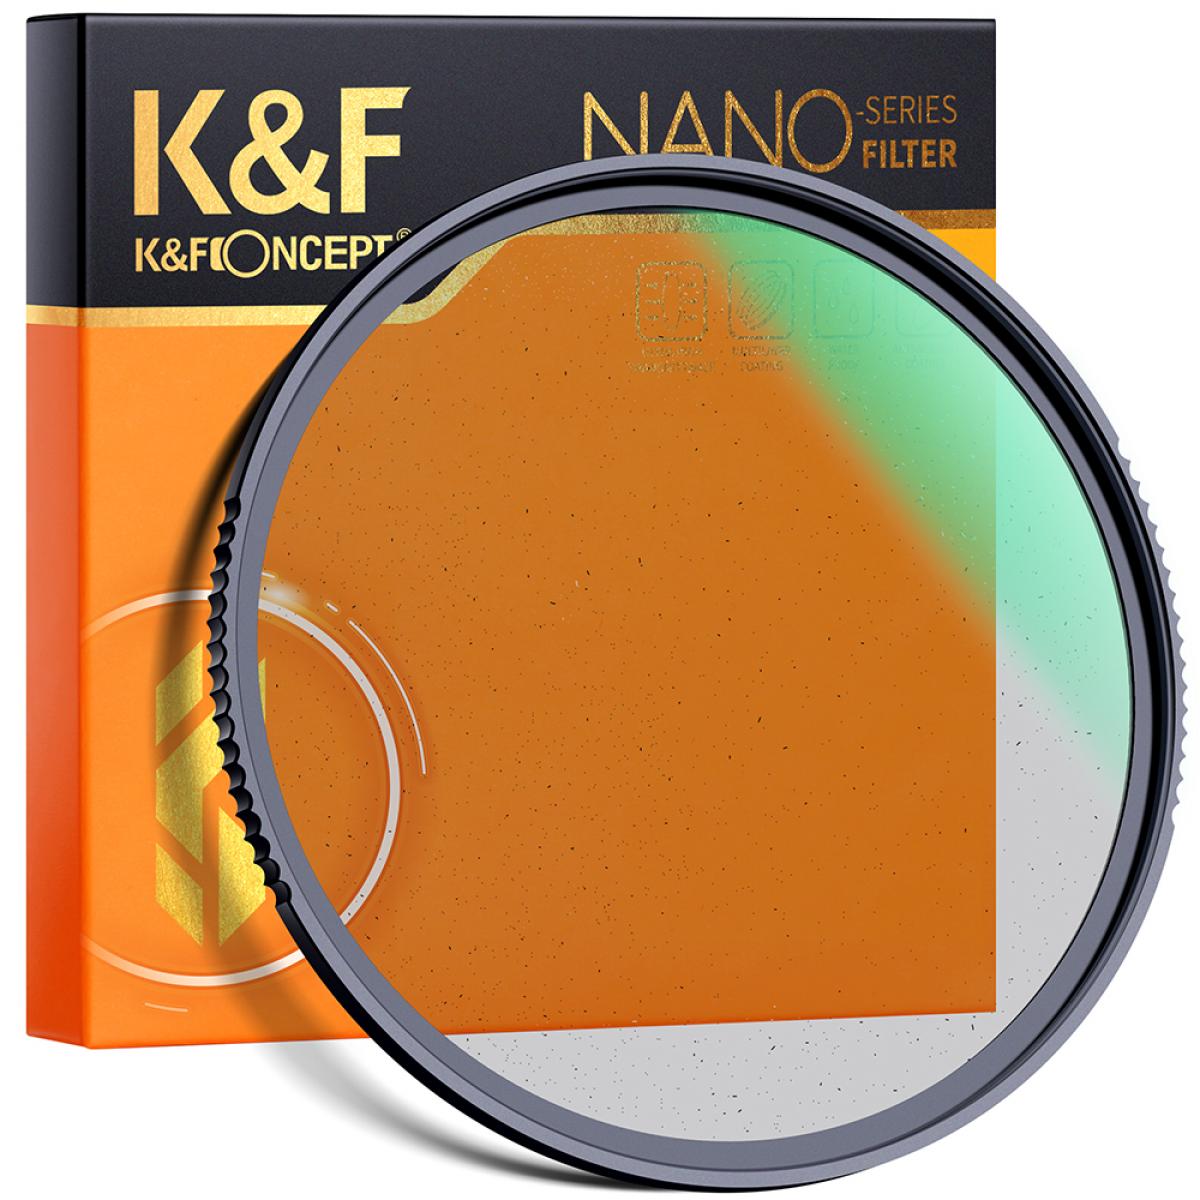 Product Image of K&F Concept Black Mist Filter 1/4 Special Effect Multi Coated With Waterproof Scratch-Resistant Anti-Reflection Nano-X